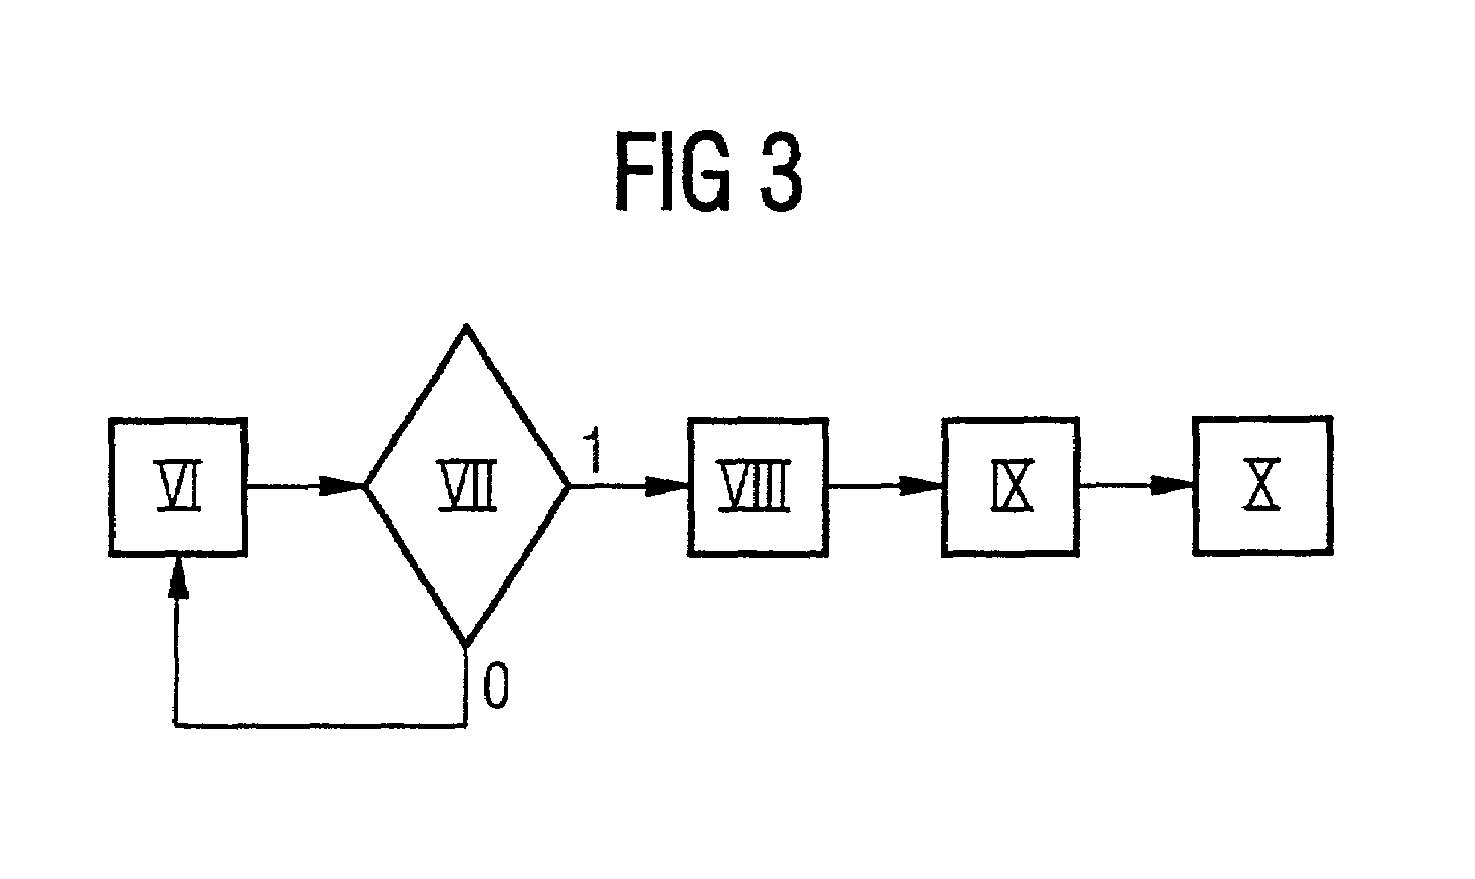 Method of controlling the costs arising during operations of an installation